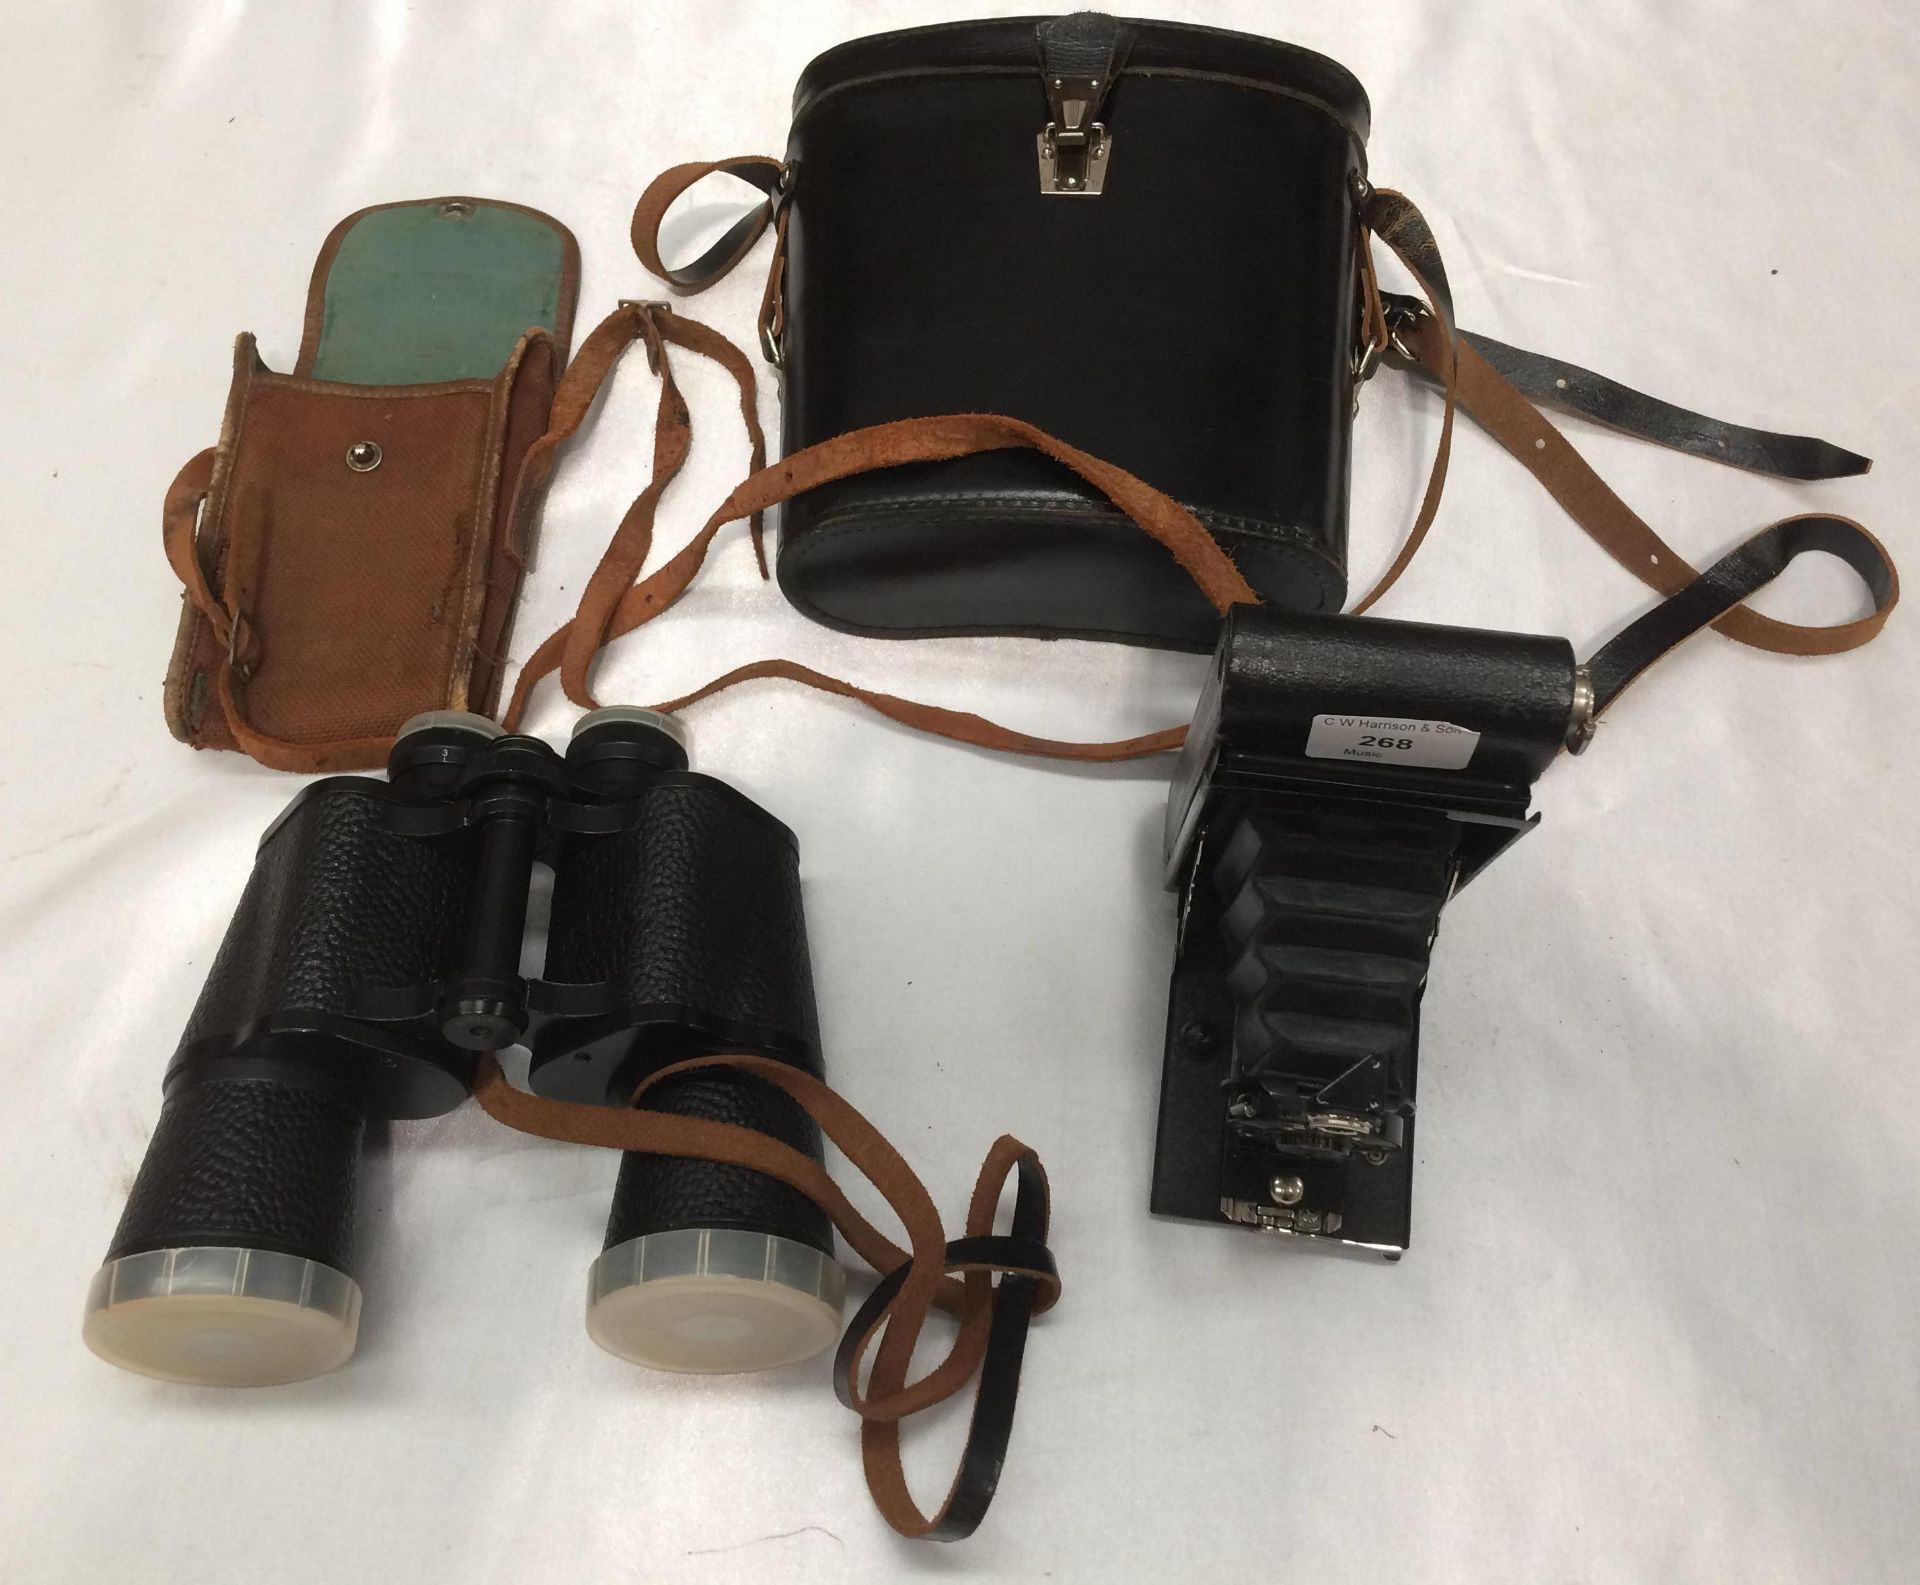 Two items - GNU USSR 7x50 binoculars in case and a Kodak No:2 autographic Brownie camera